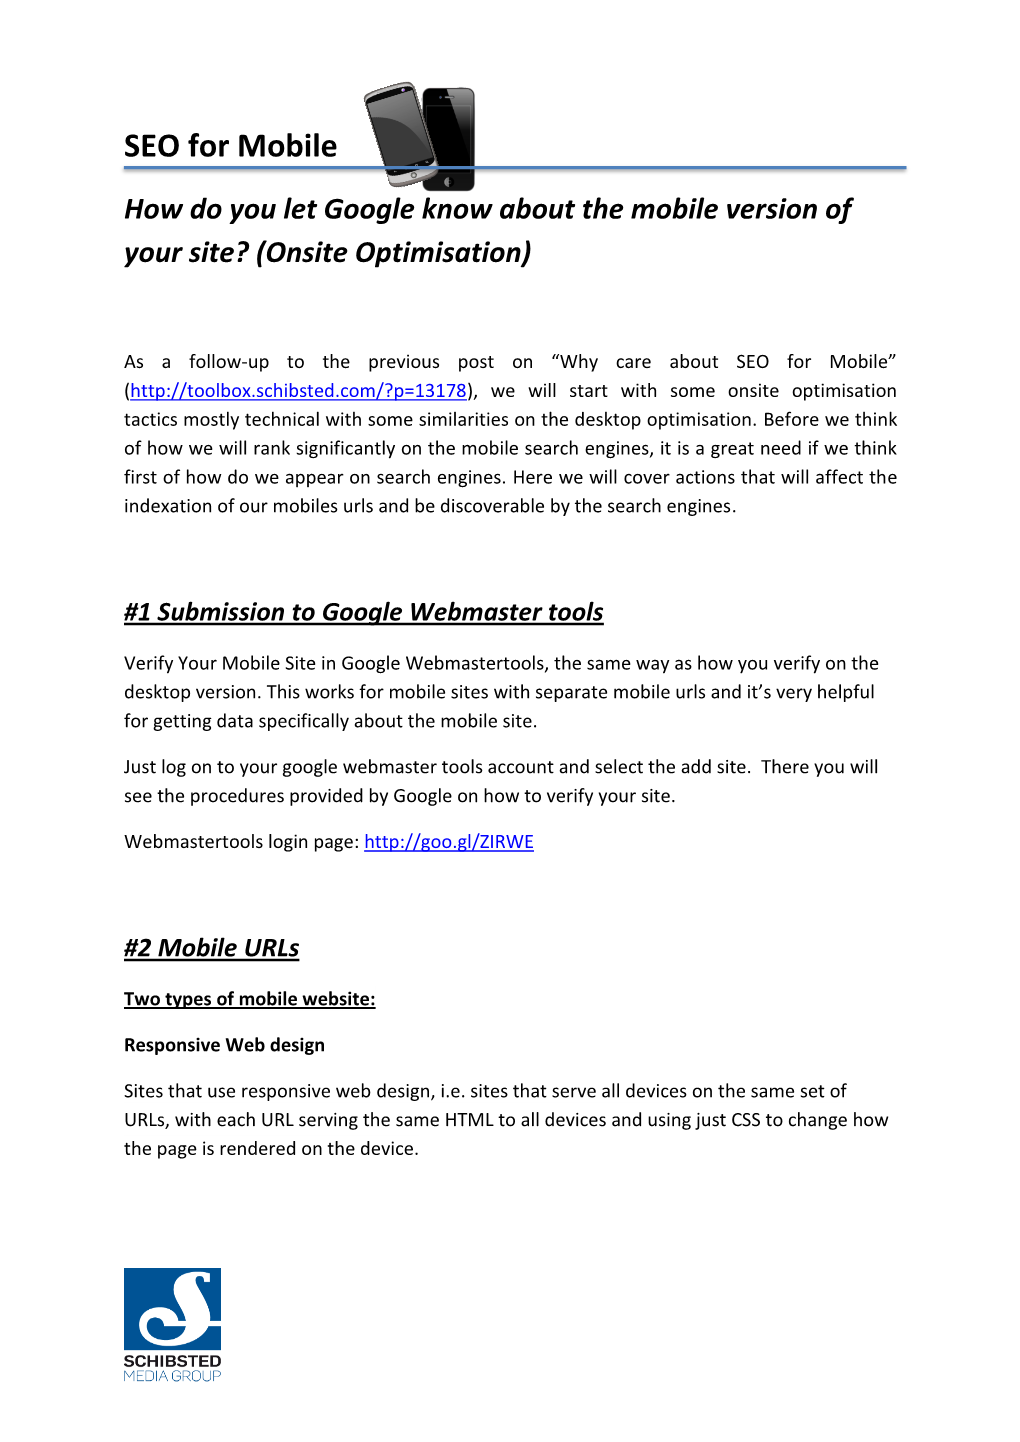 SEO for Mobile How Do You Let Google Know About the Mobile Version of Your Site? (Onsite Optimisation)